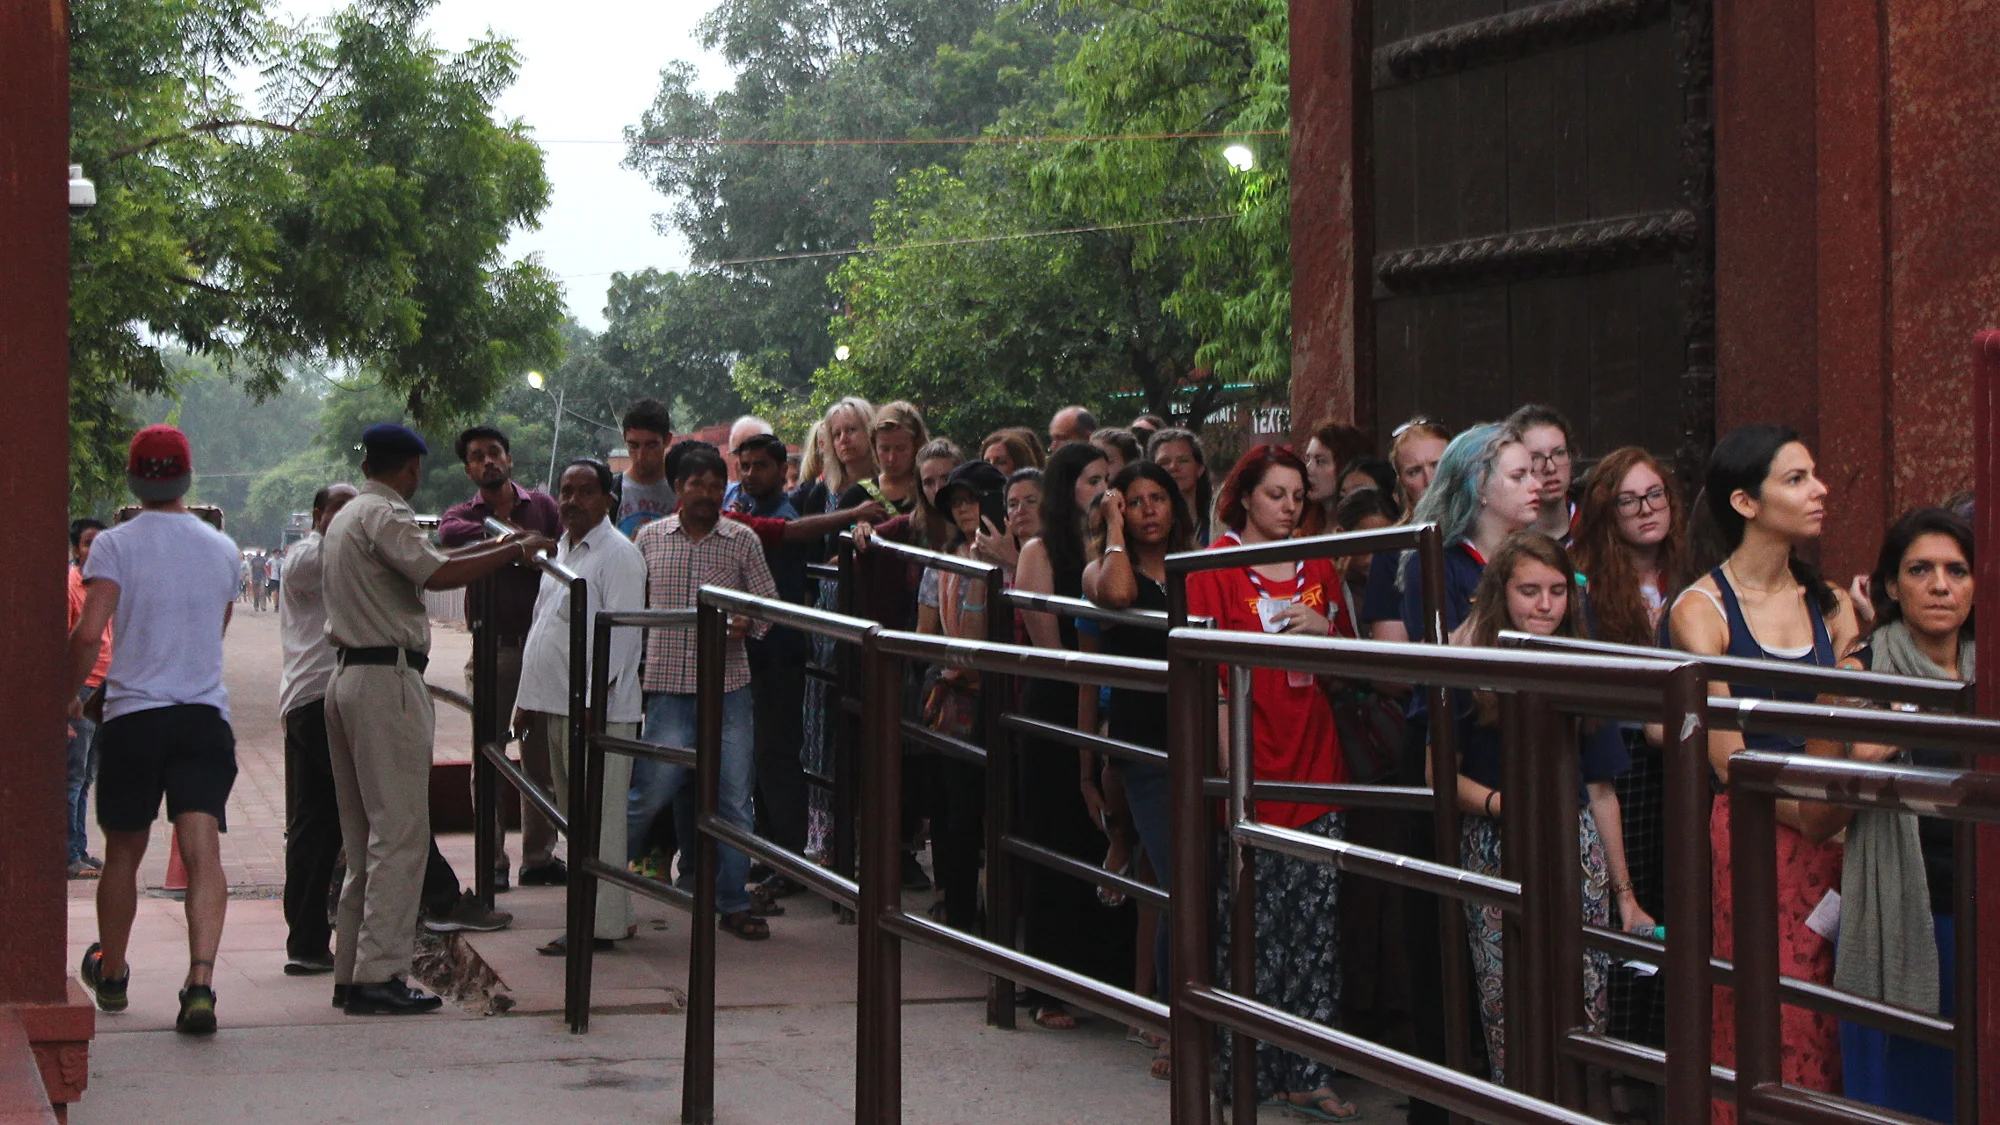 Men and women have separate lines at the entrance to Taj Mahal. The line for men is empty at sunrise, while the line for women continues behind the corner.